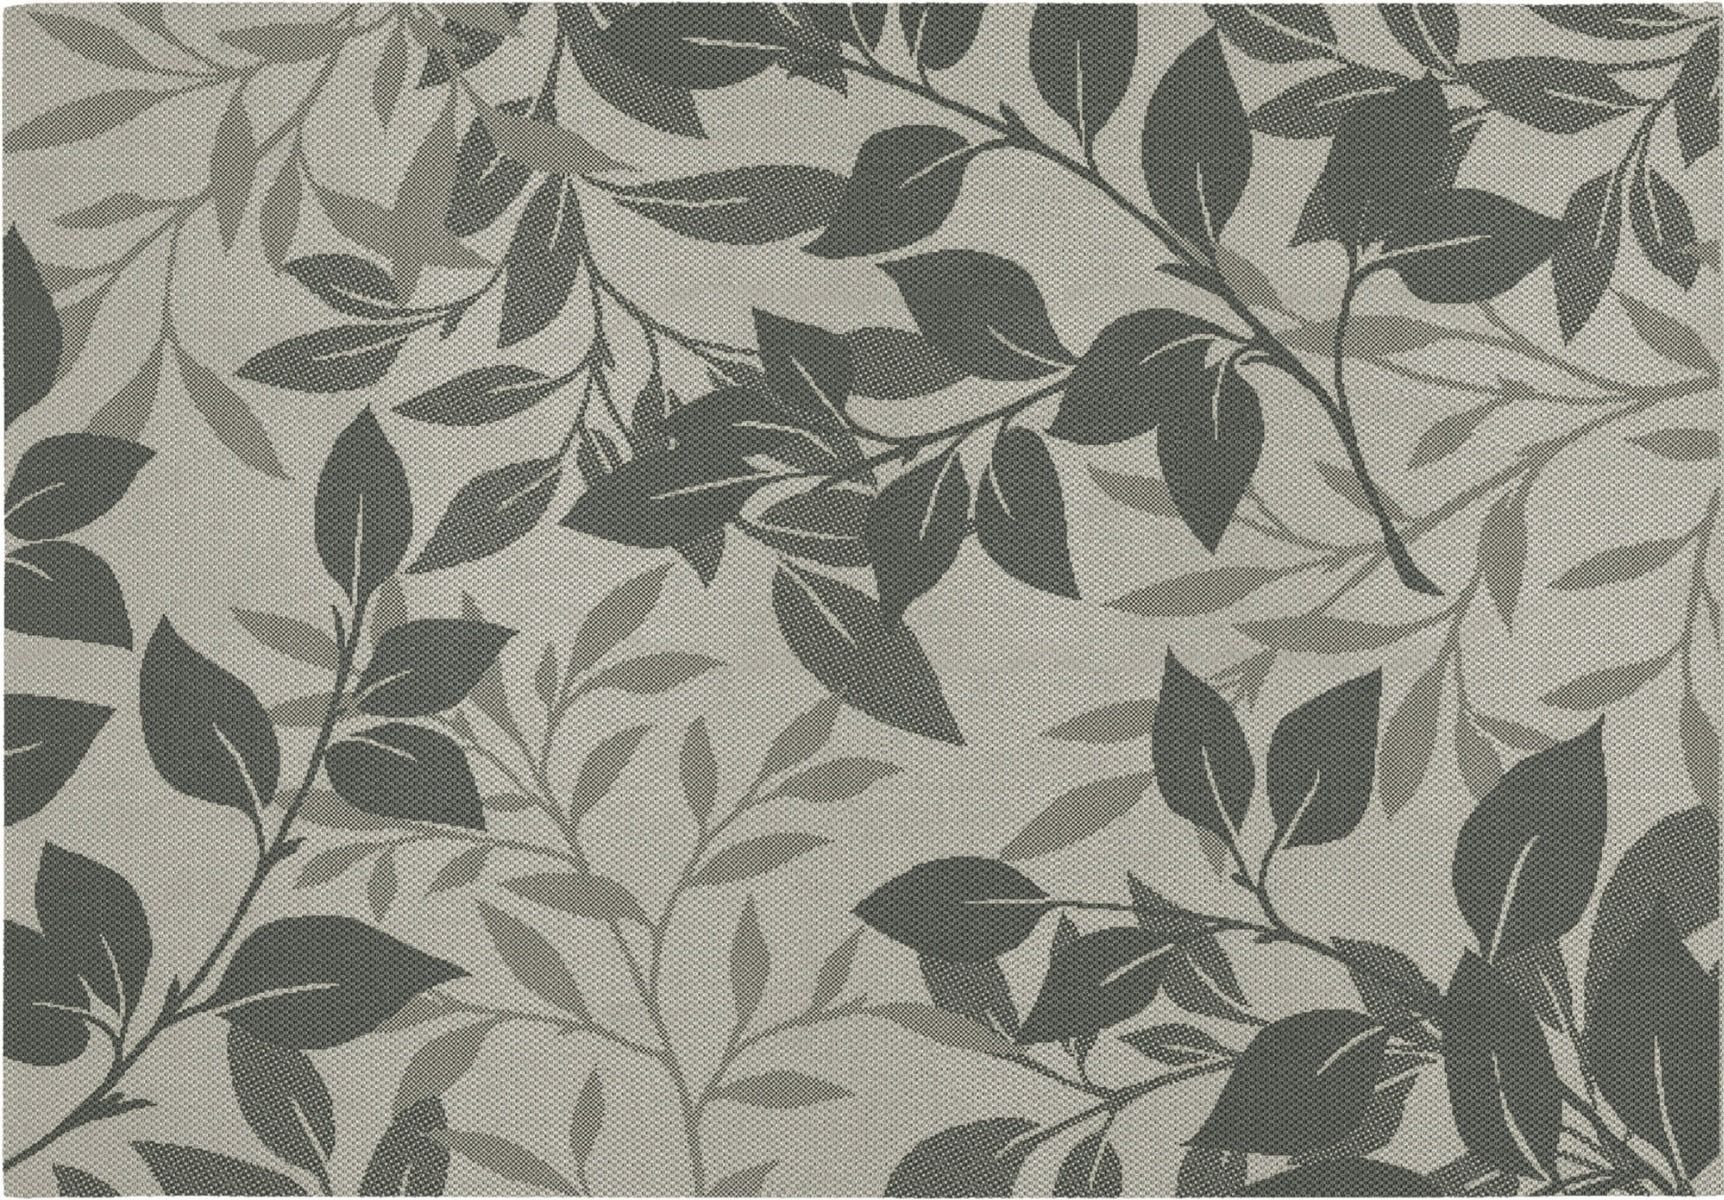 Buitenkleed Naturalis Forest Leaf 160x230cm